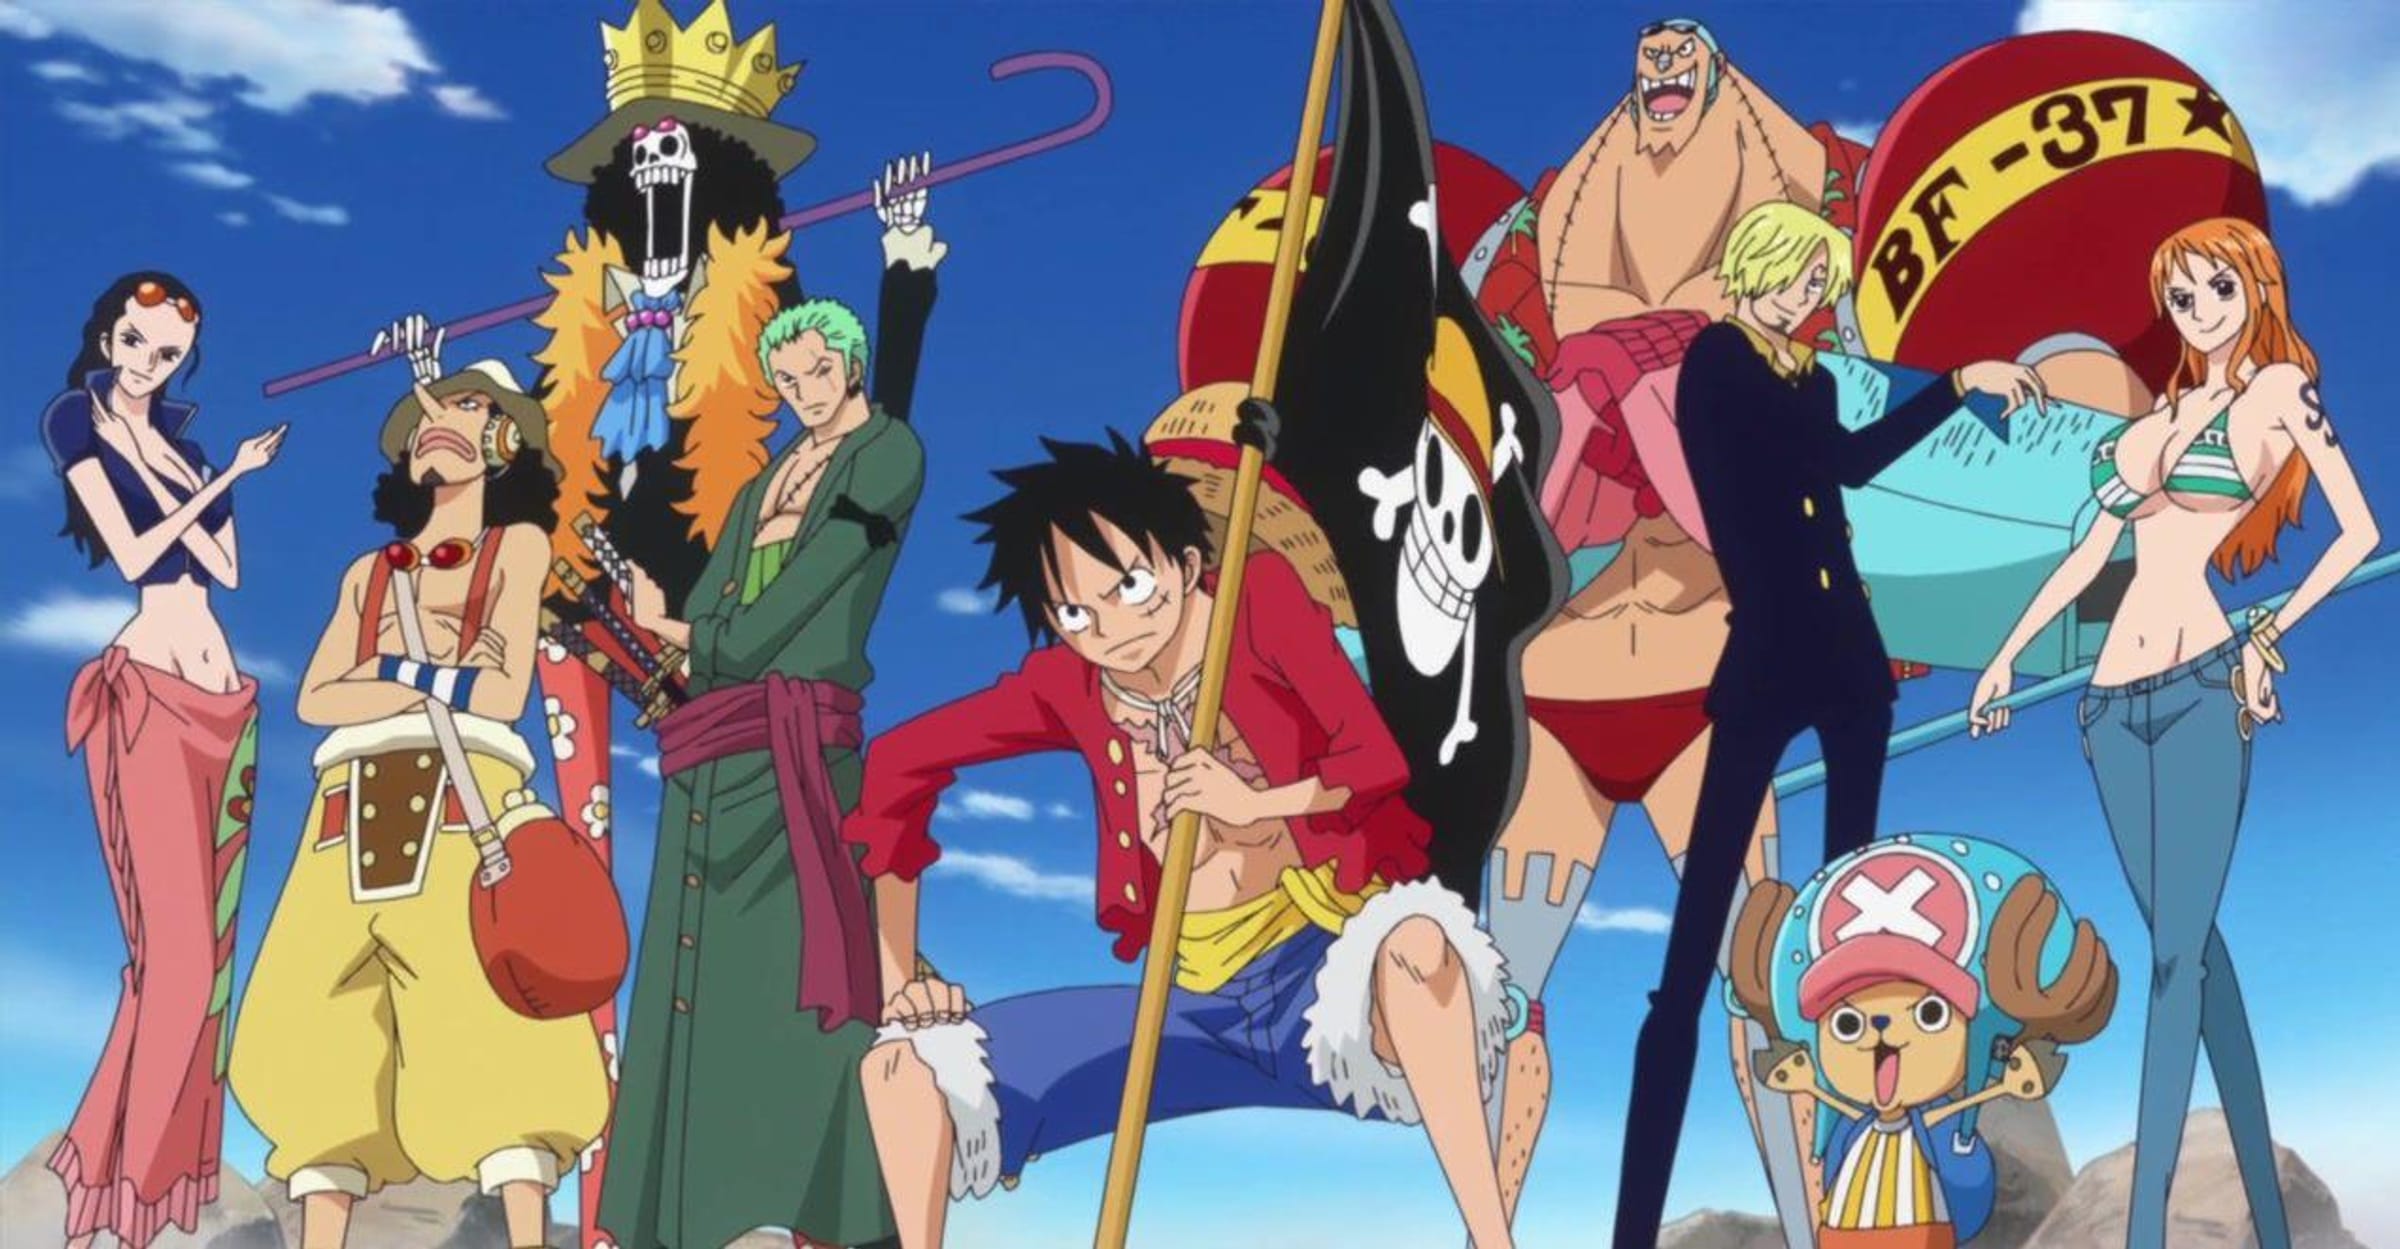 10 One Piece characters, ranked from most ambitious to least